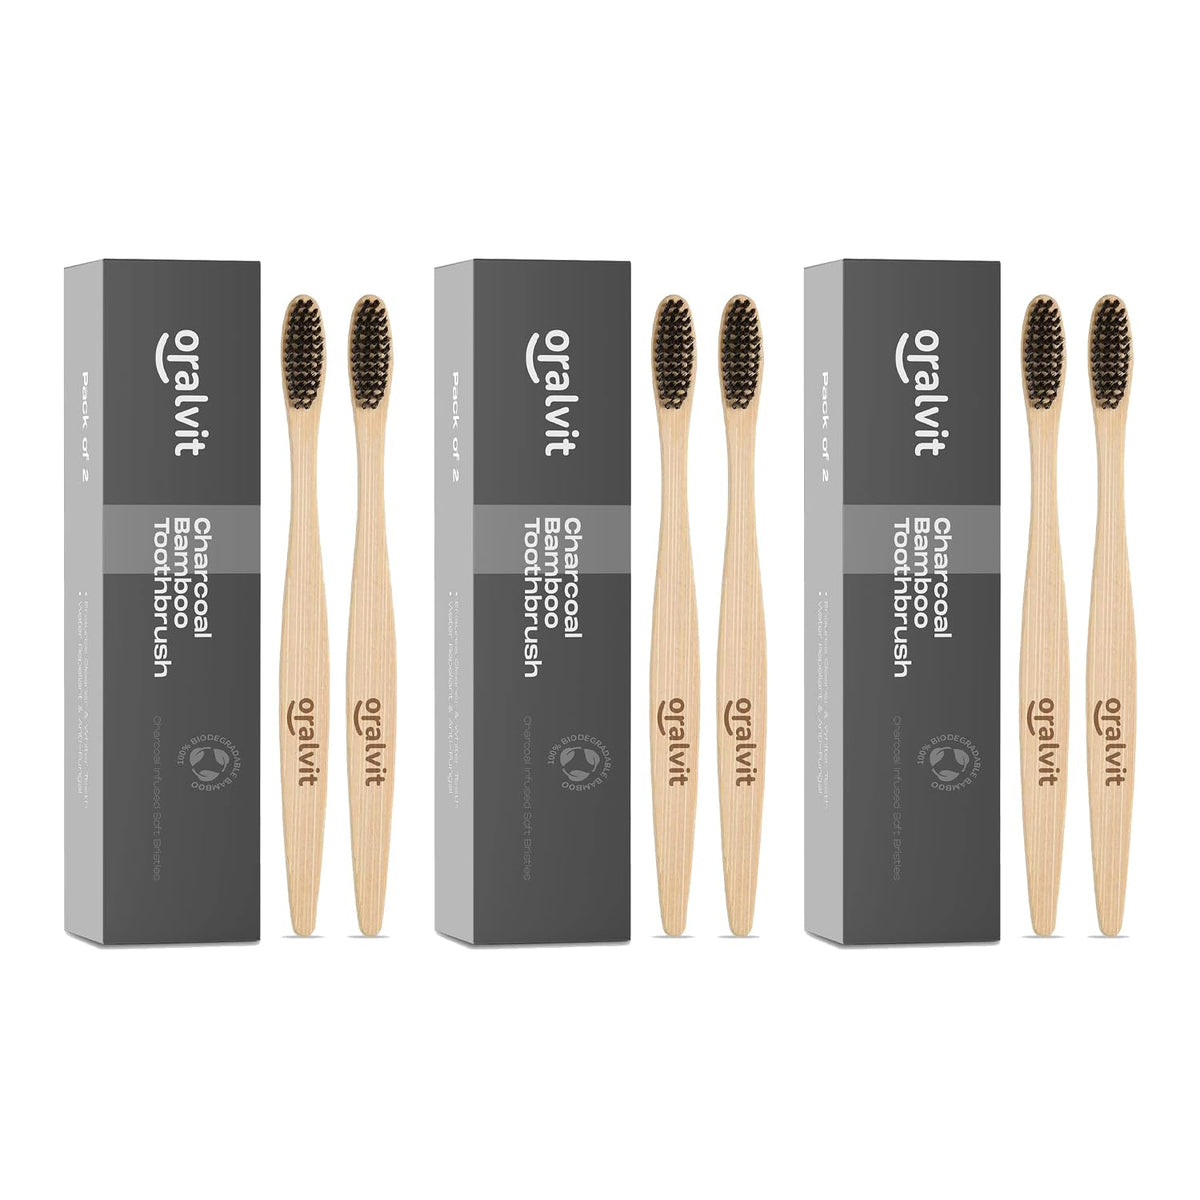 Oralvit Bamboo Charcoal Toothbrush 100% Natural | Anti-bacterial & Biodegradable | Eco-Friendly | For Adults & Kids | BPA Free - Pack of 2 (Pack of 3)